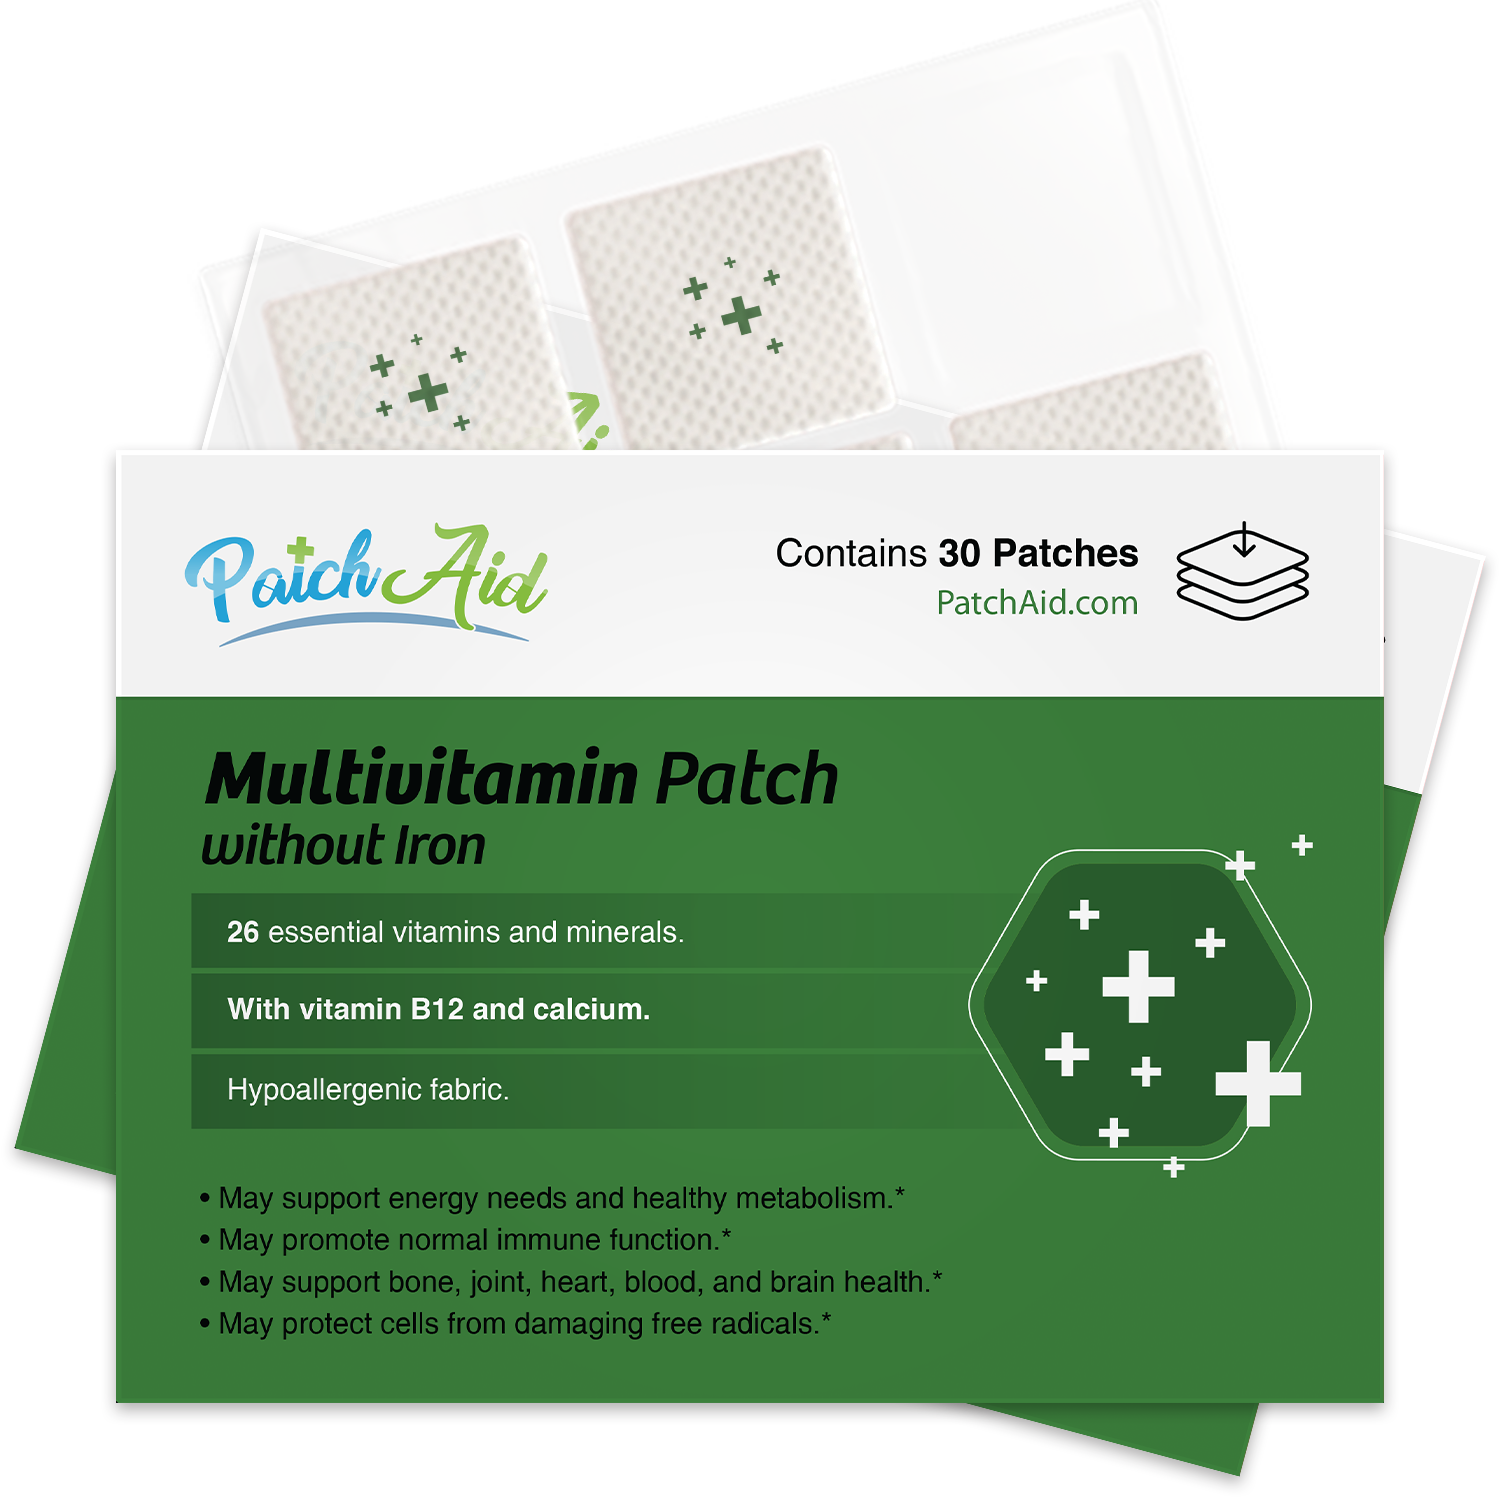 MultiVitamin Plus Topical Patch without Iron by PatchAid